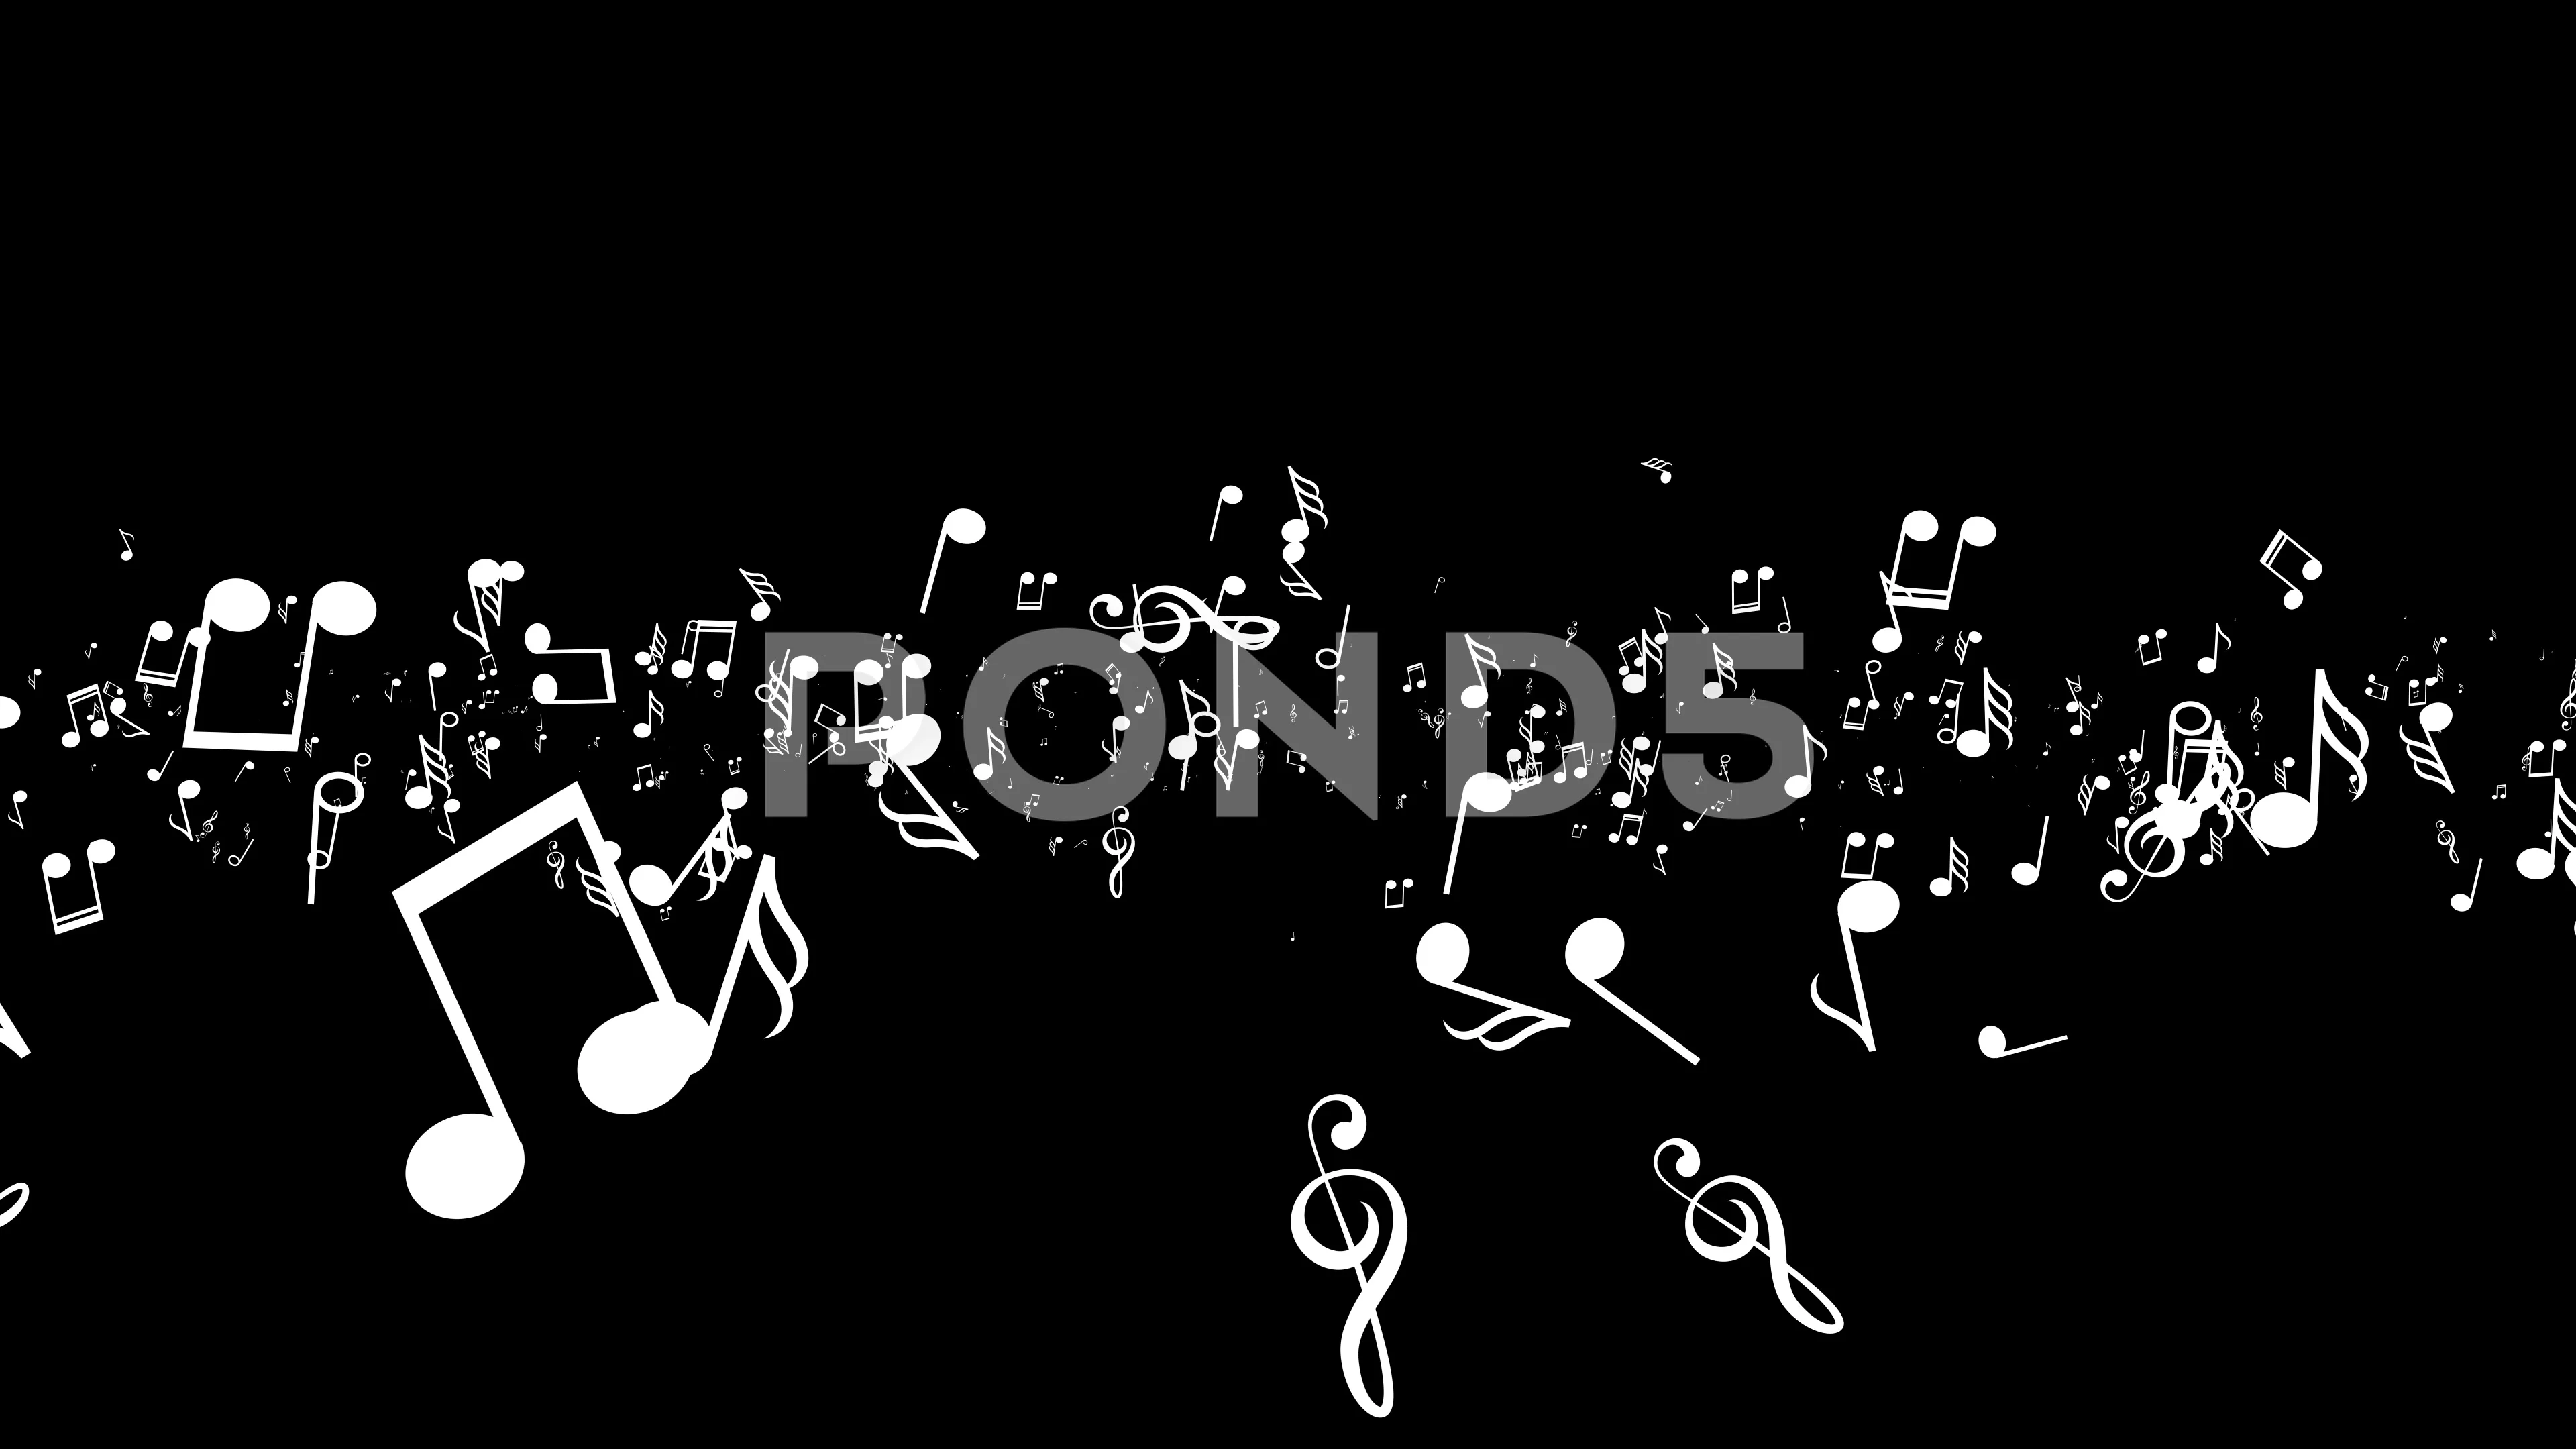 music notes black and white background